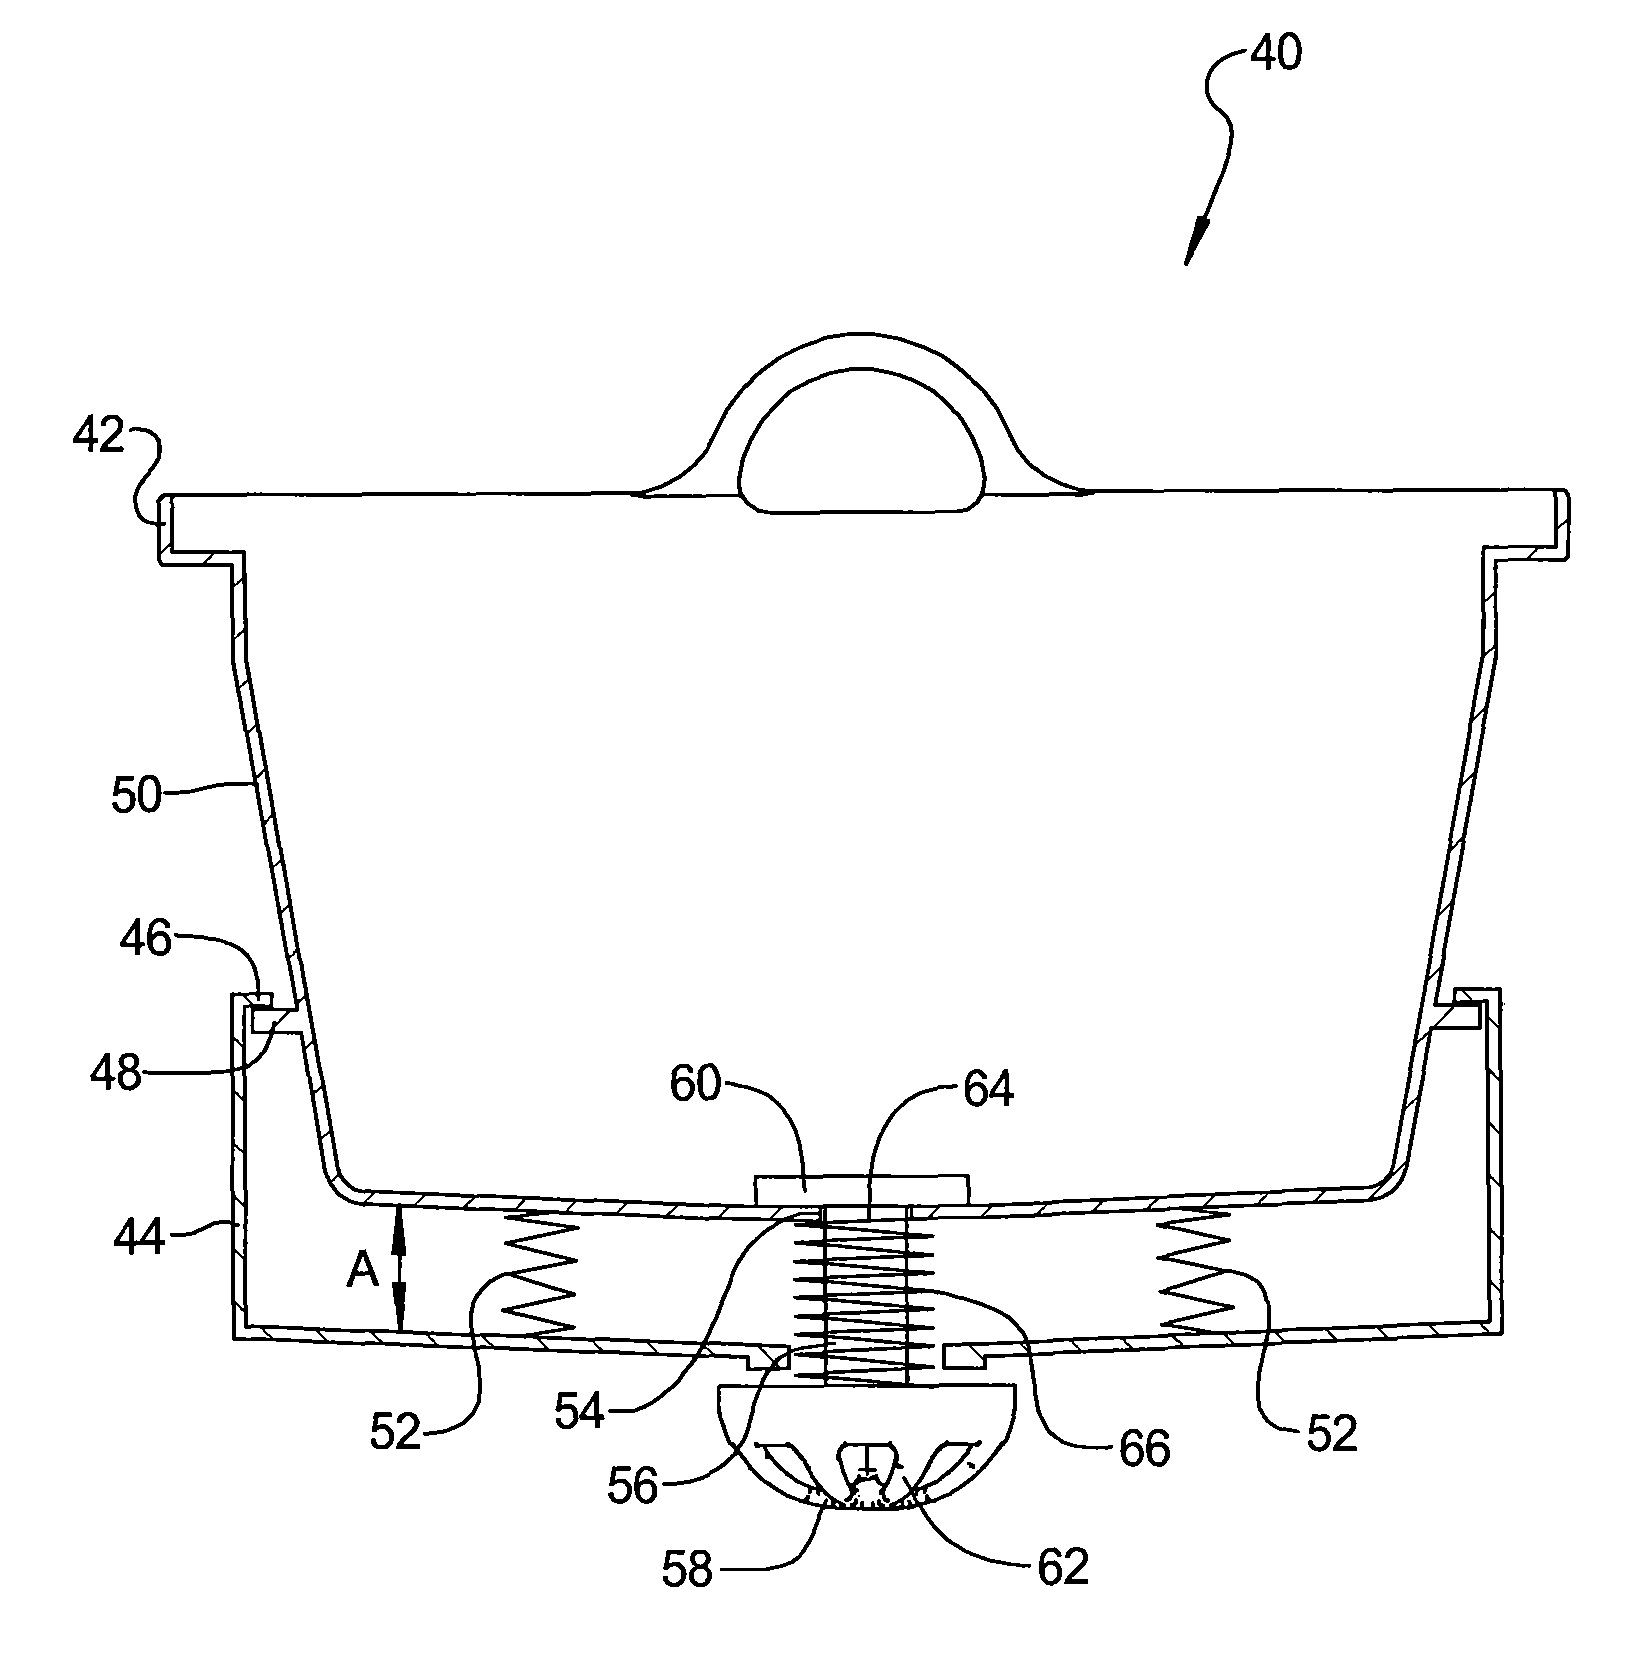 Brewing device having a delayed release mechanism